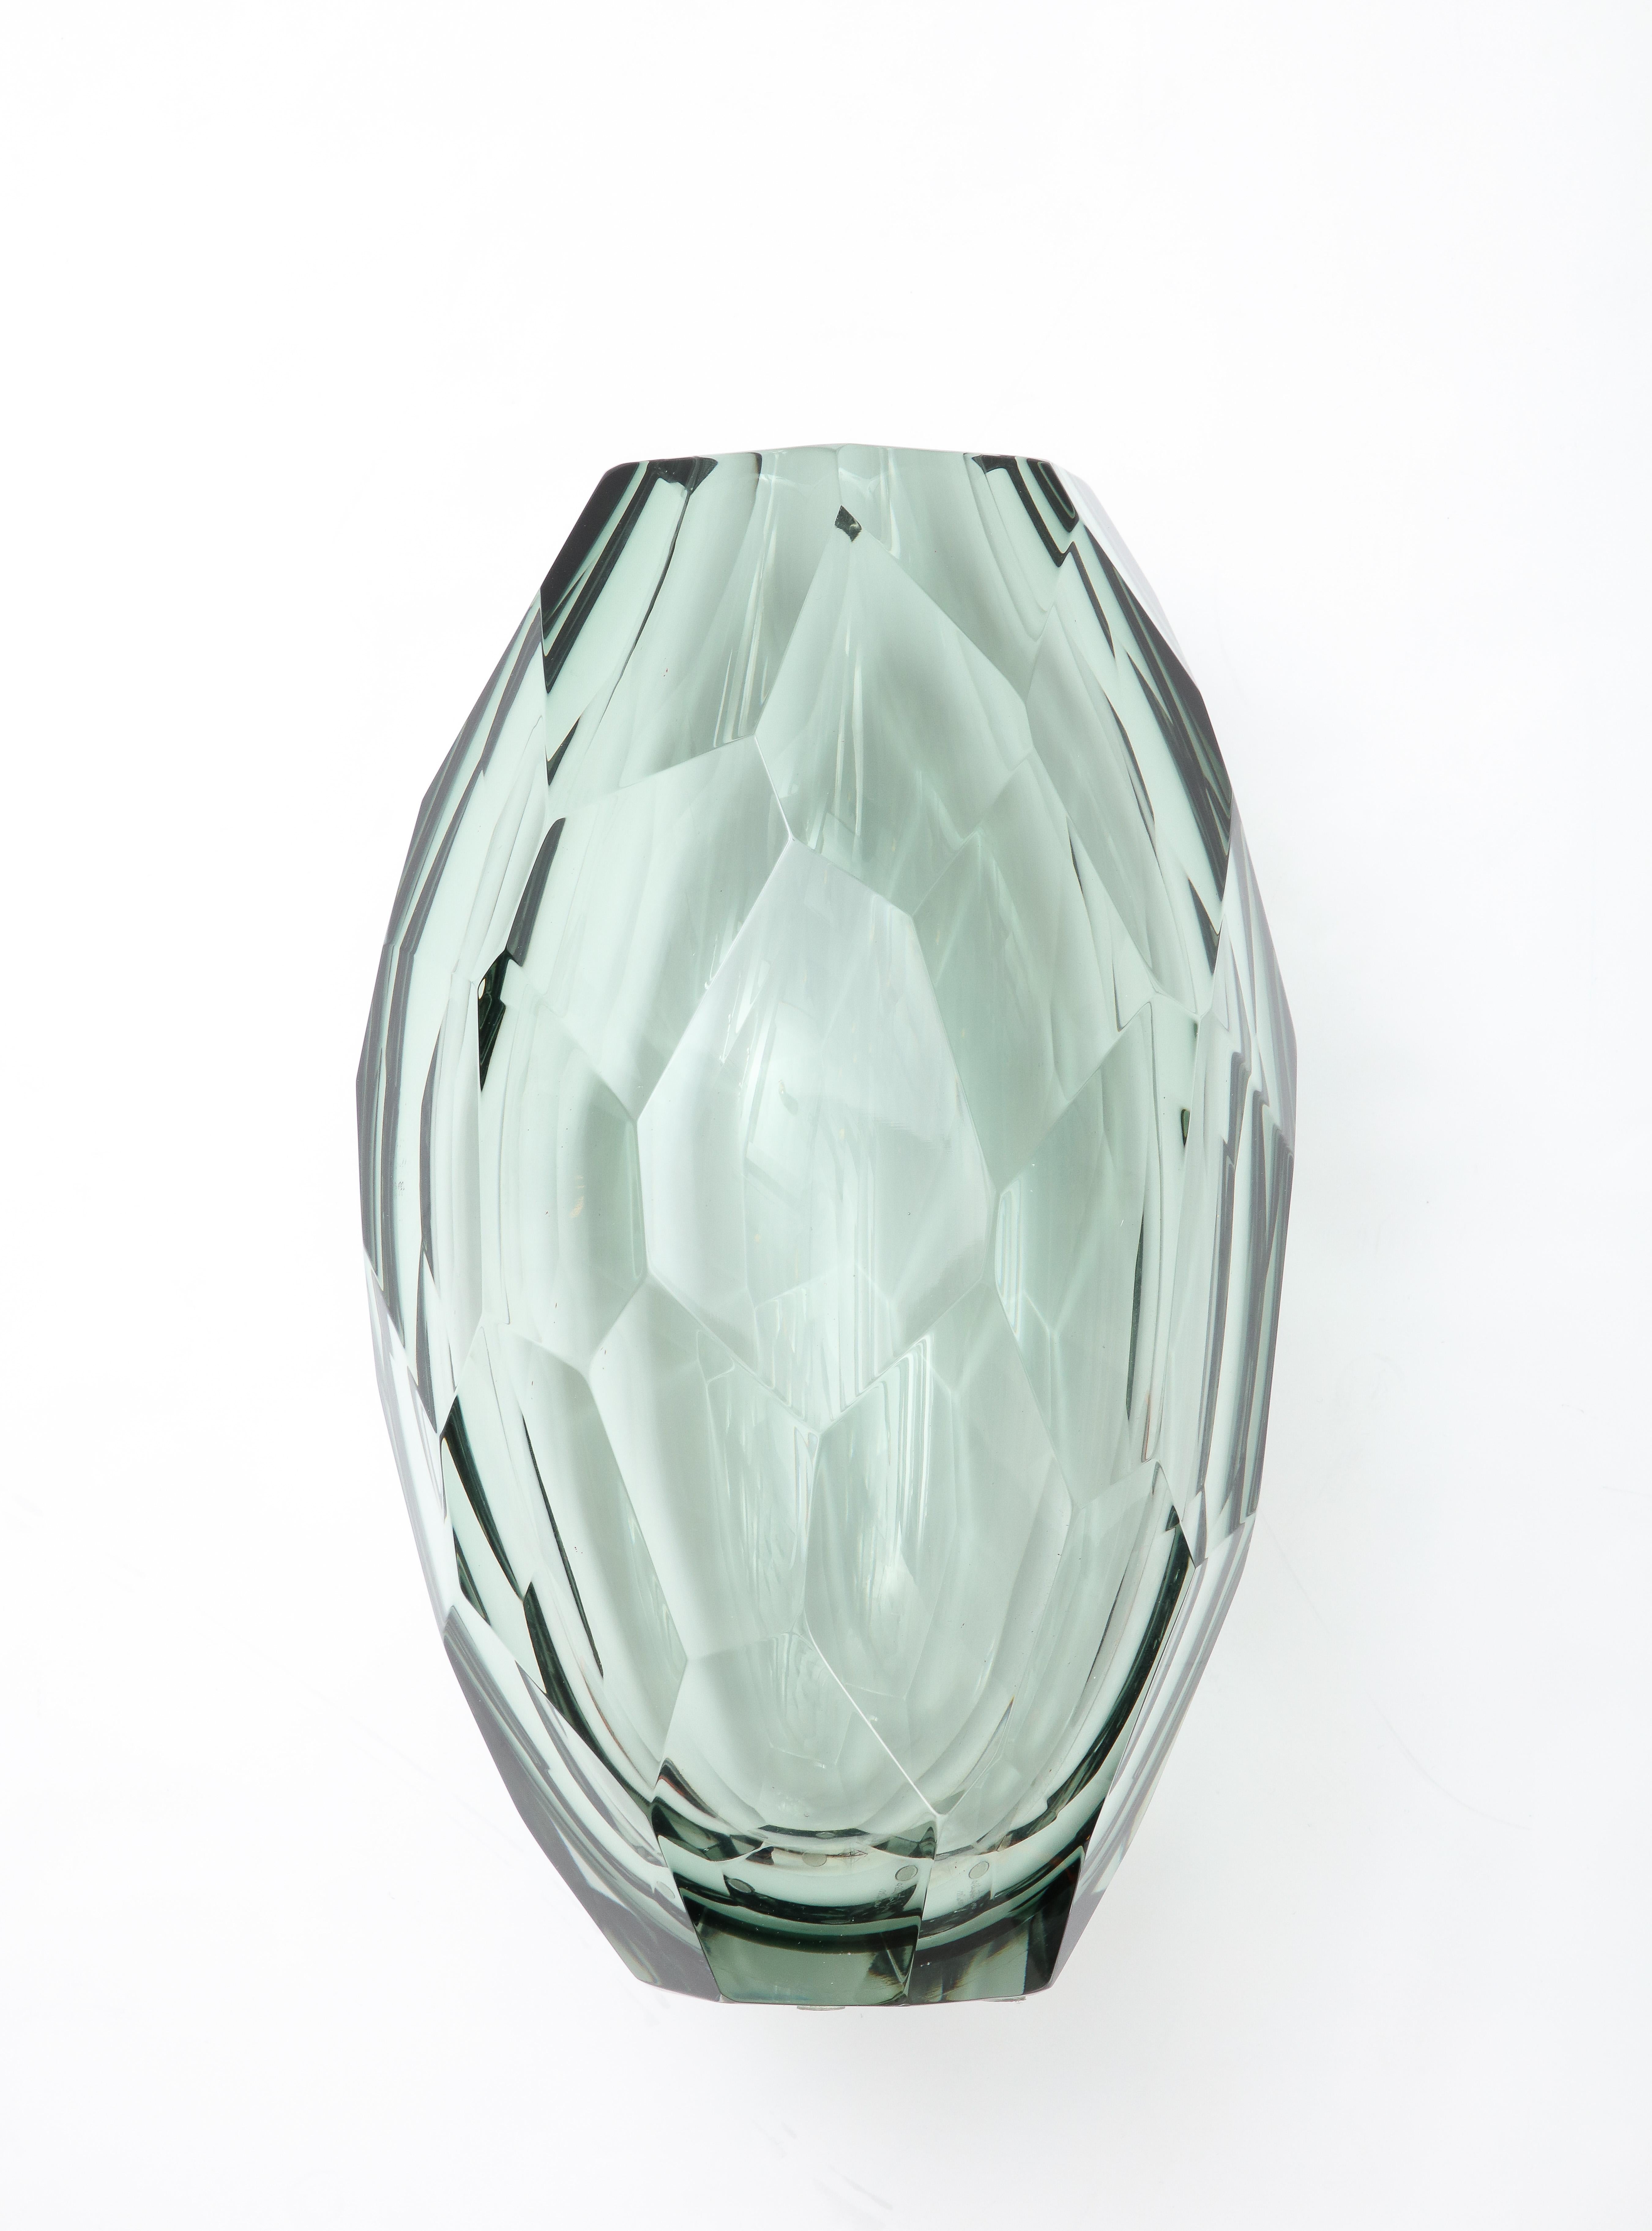 Single Handblown Faceted Grey Green Murano glass vase, handcrafted in Italy by the Murano glass master, Alberto Dona, and signed. This vase is heavy and substantial and handblown in a thick and solid Murano glass. The faceted scales throughout the